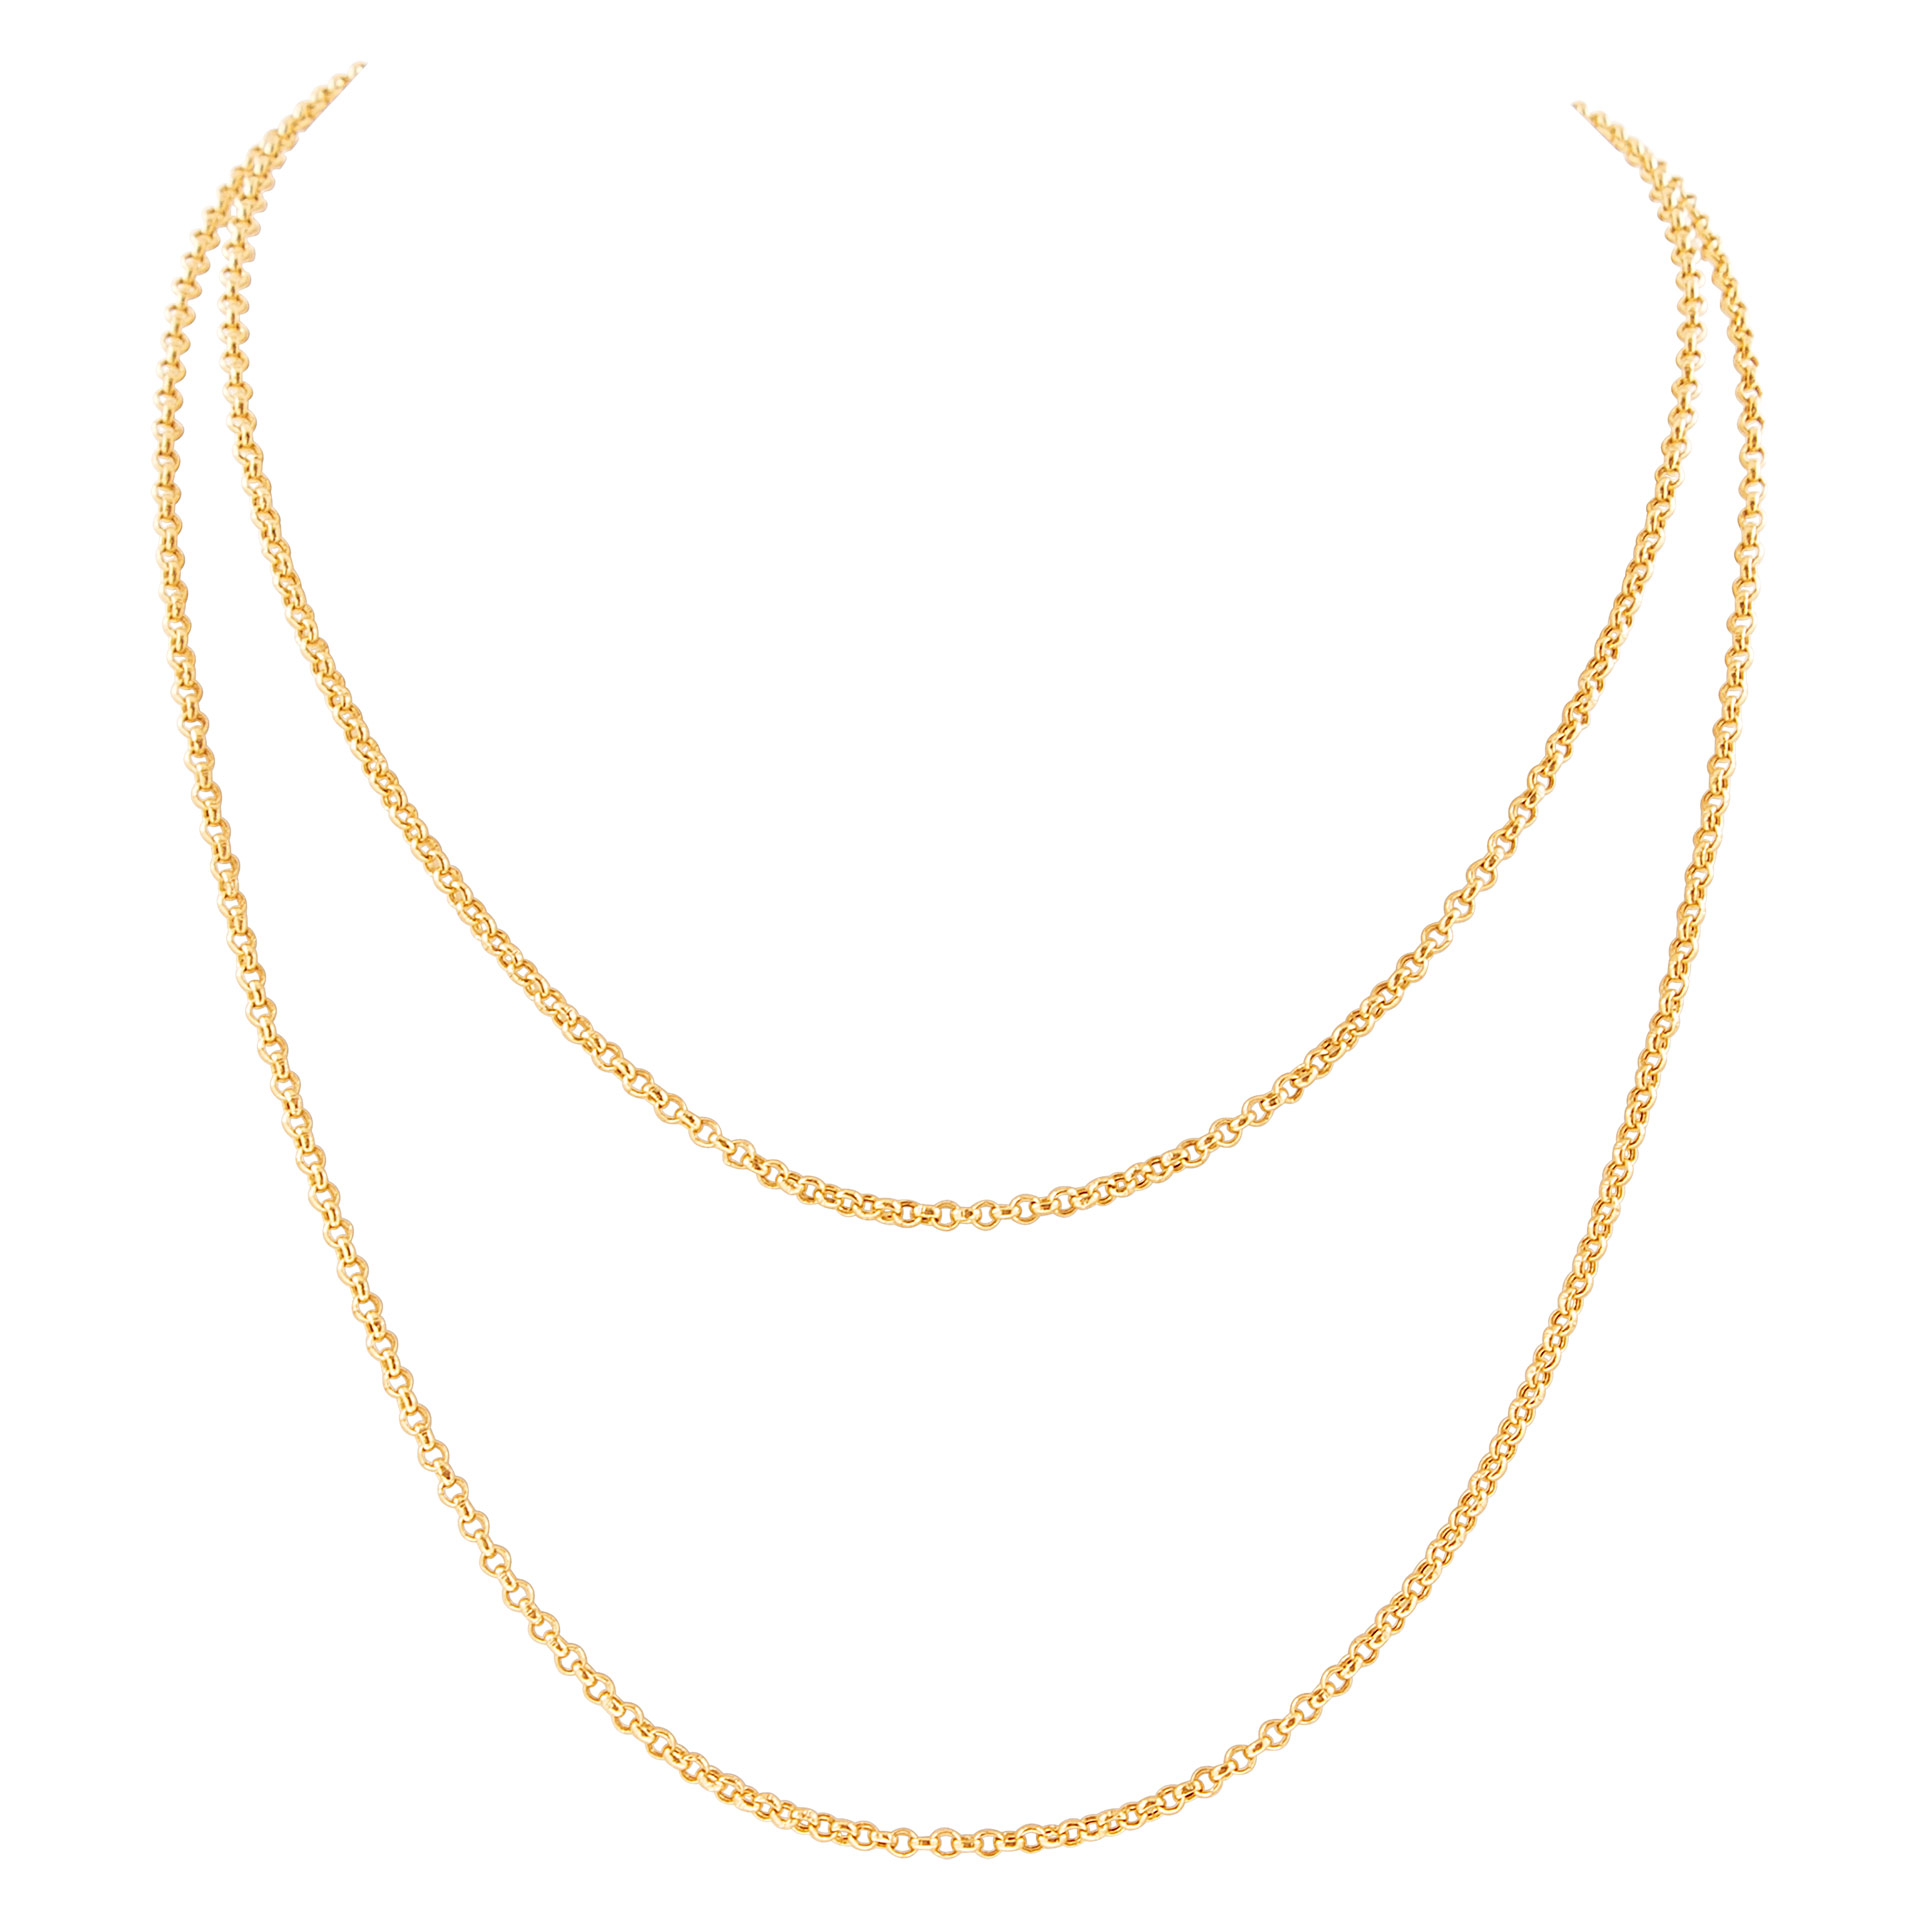 Elongated link chain in 18k yellow gold image 1